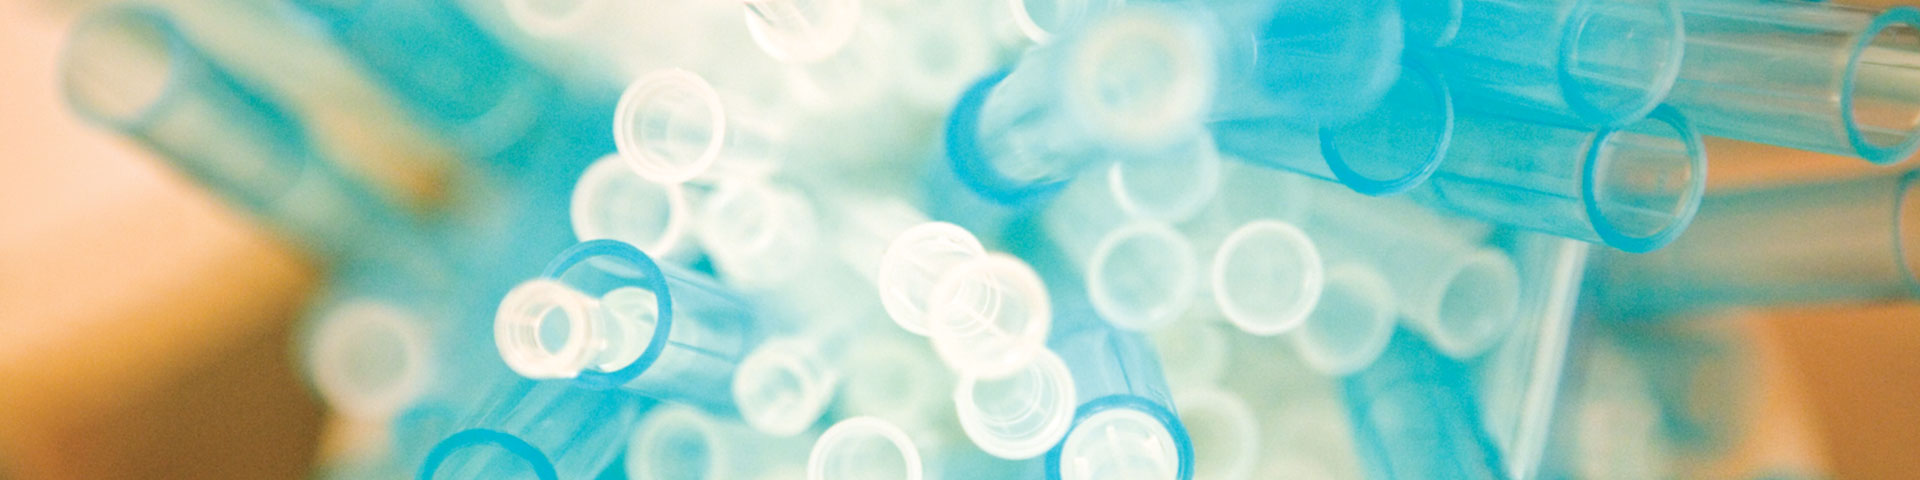 Blue and white pipettes. 